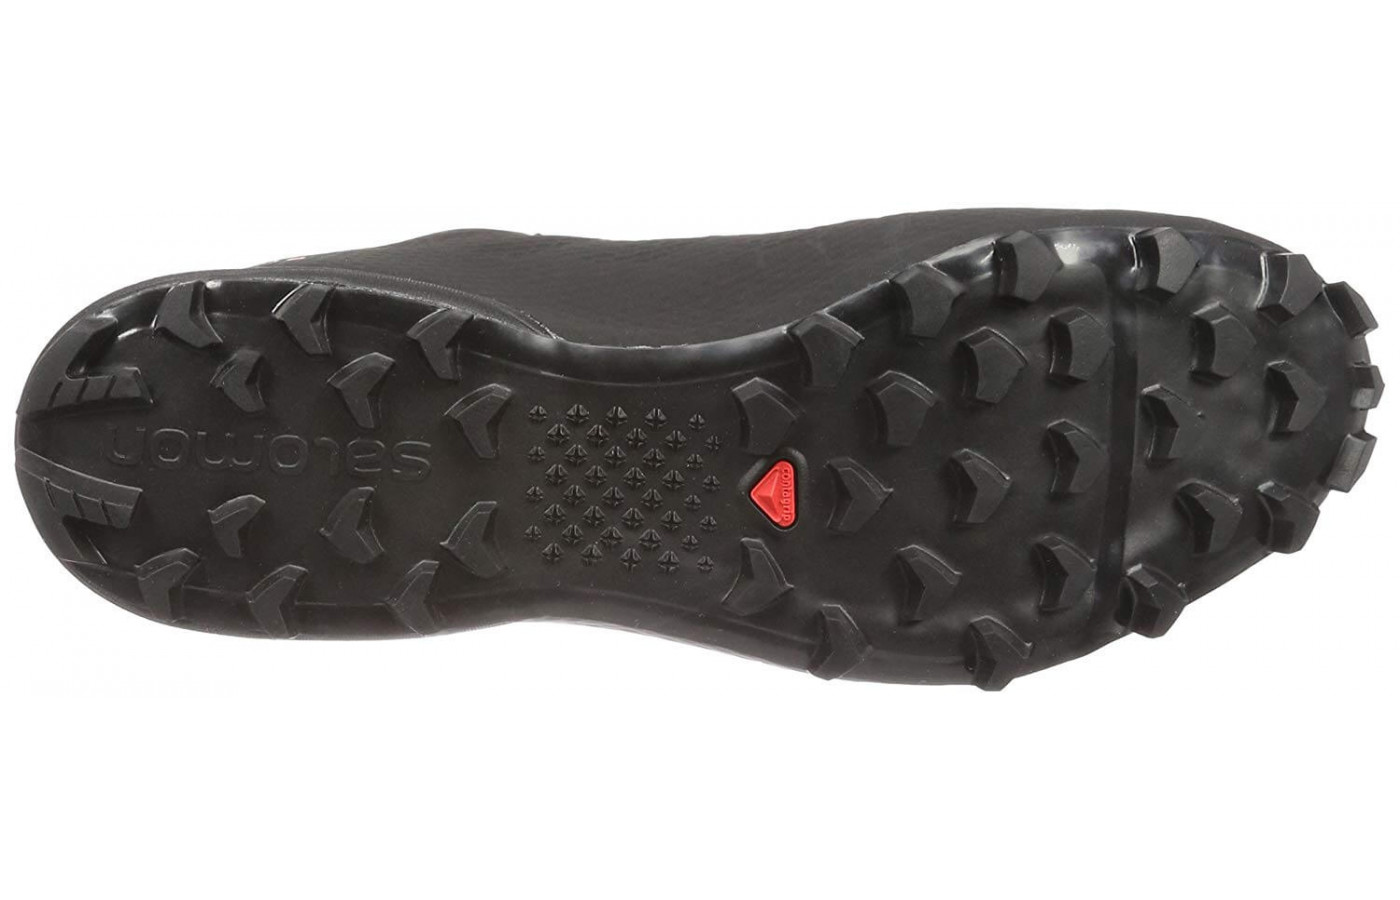 The S-Lab Speed 2 is equipped with a Premium Wet Traction Contagrip outsole